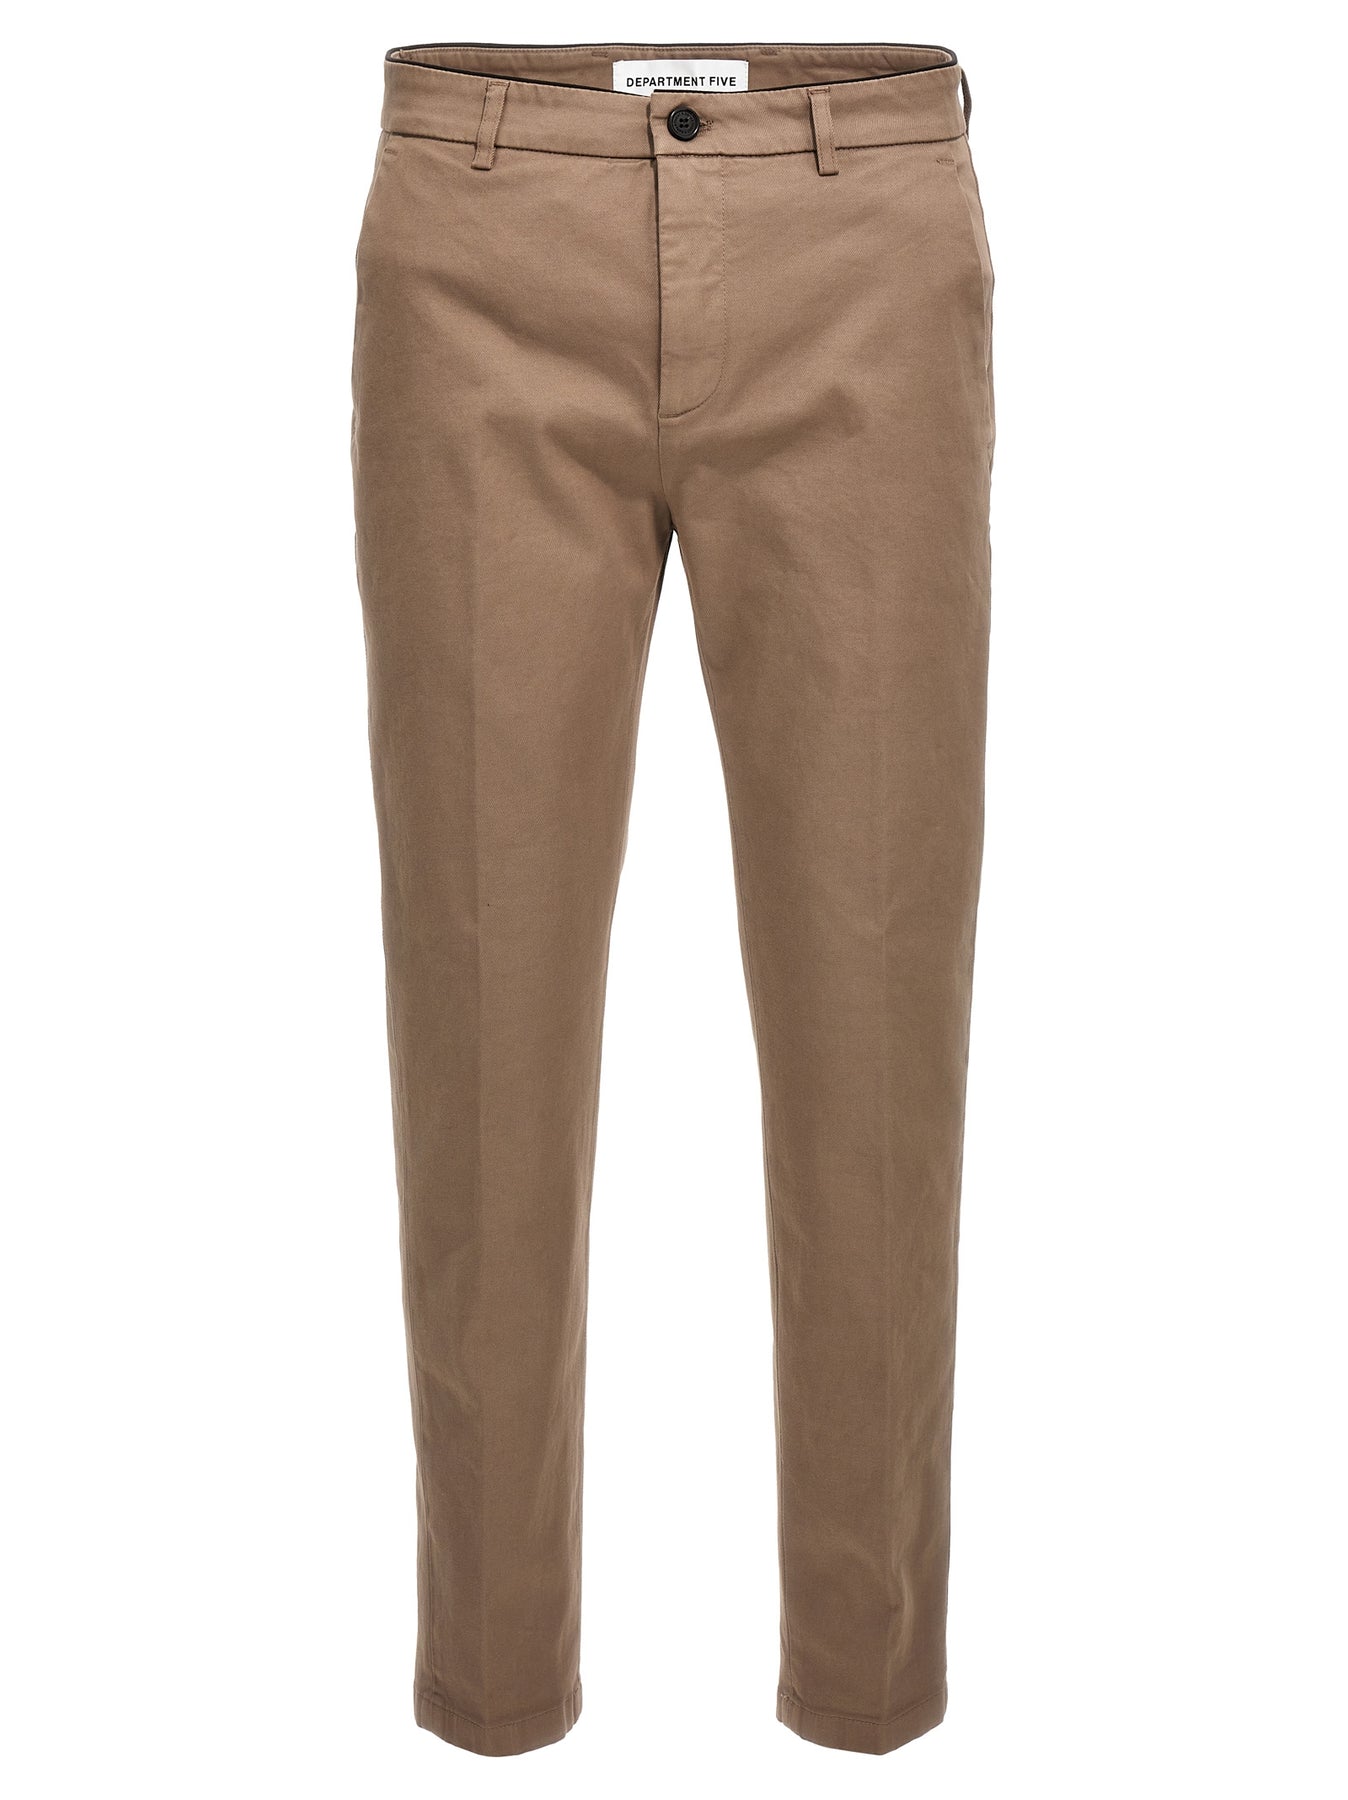 DEPARTMENT 5 PRINCE' trousers BEIGE